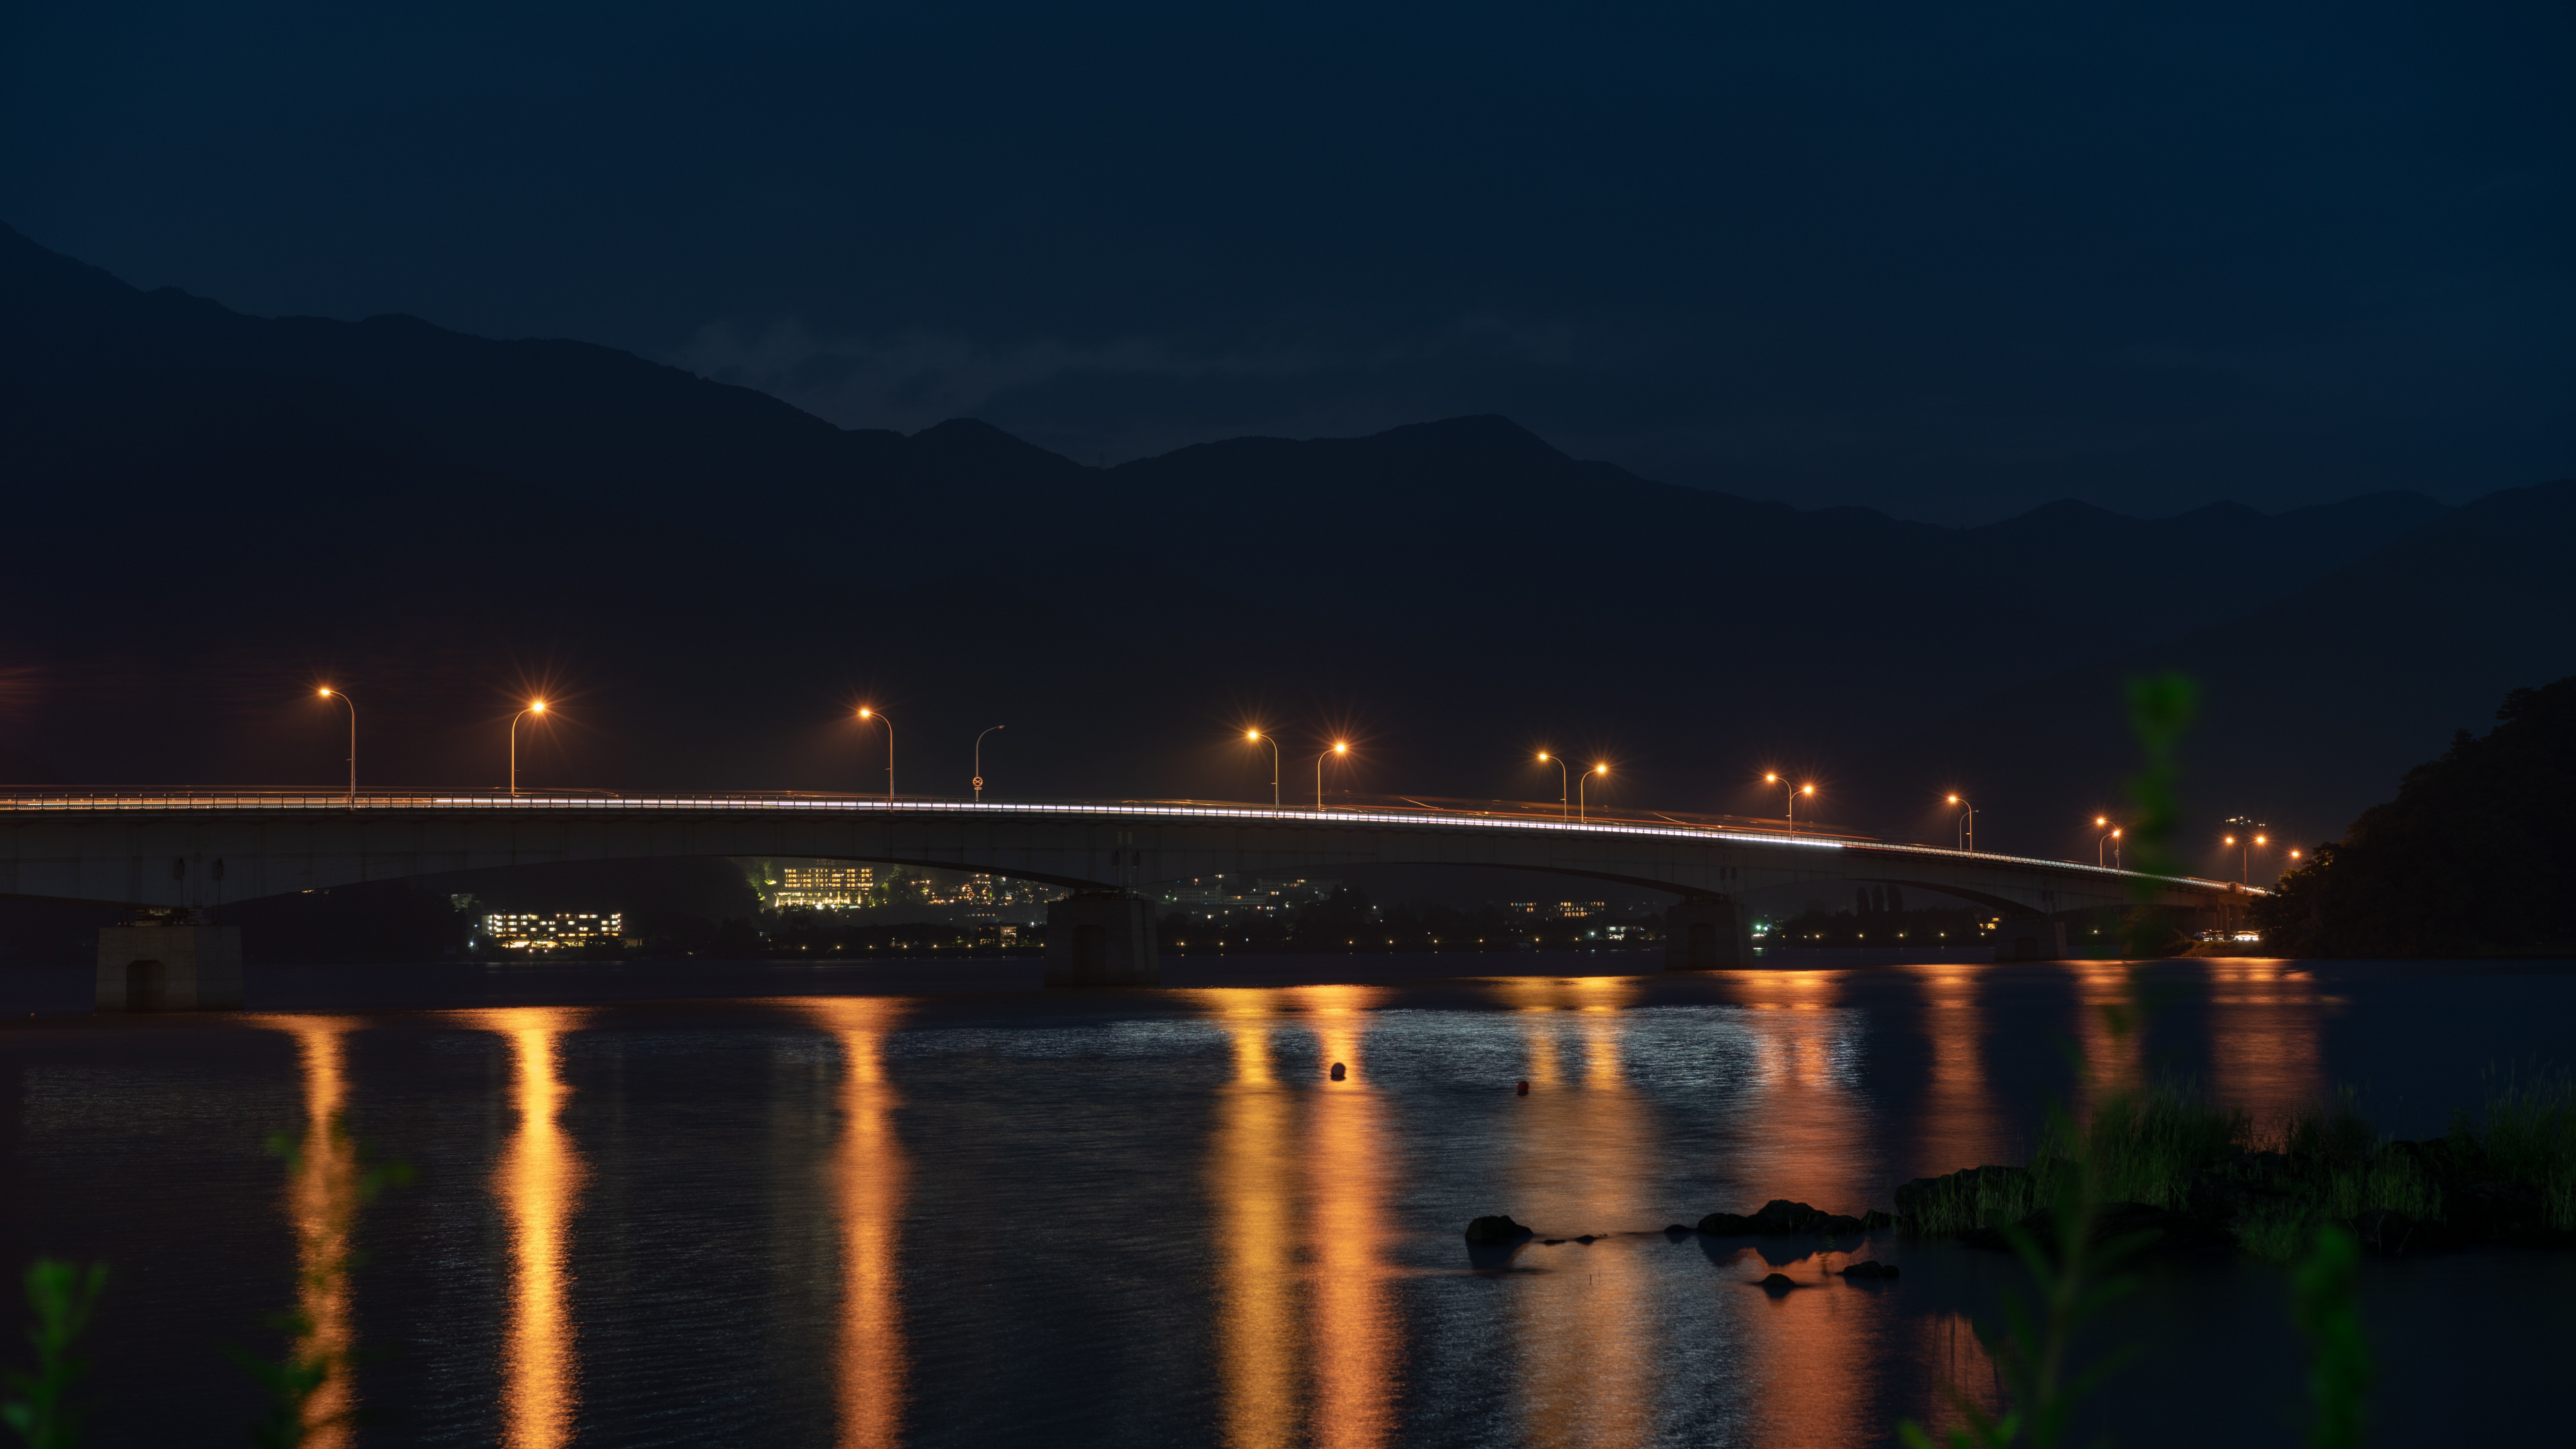 Lighted Bridge Over Water During Night Time. Wallpaper in 3840x2160 Resolution